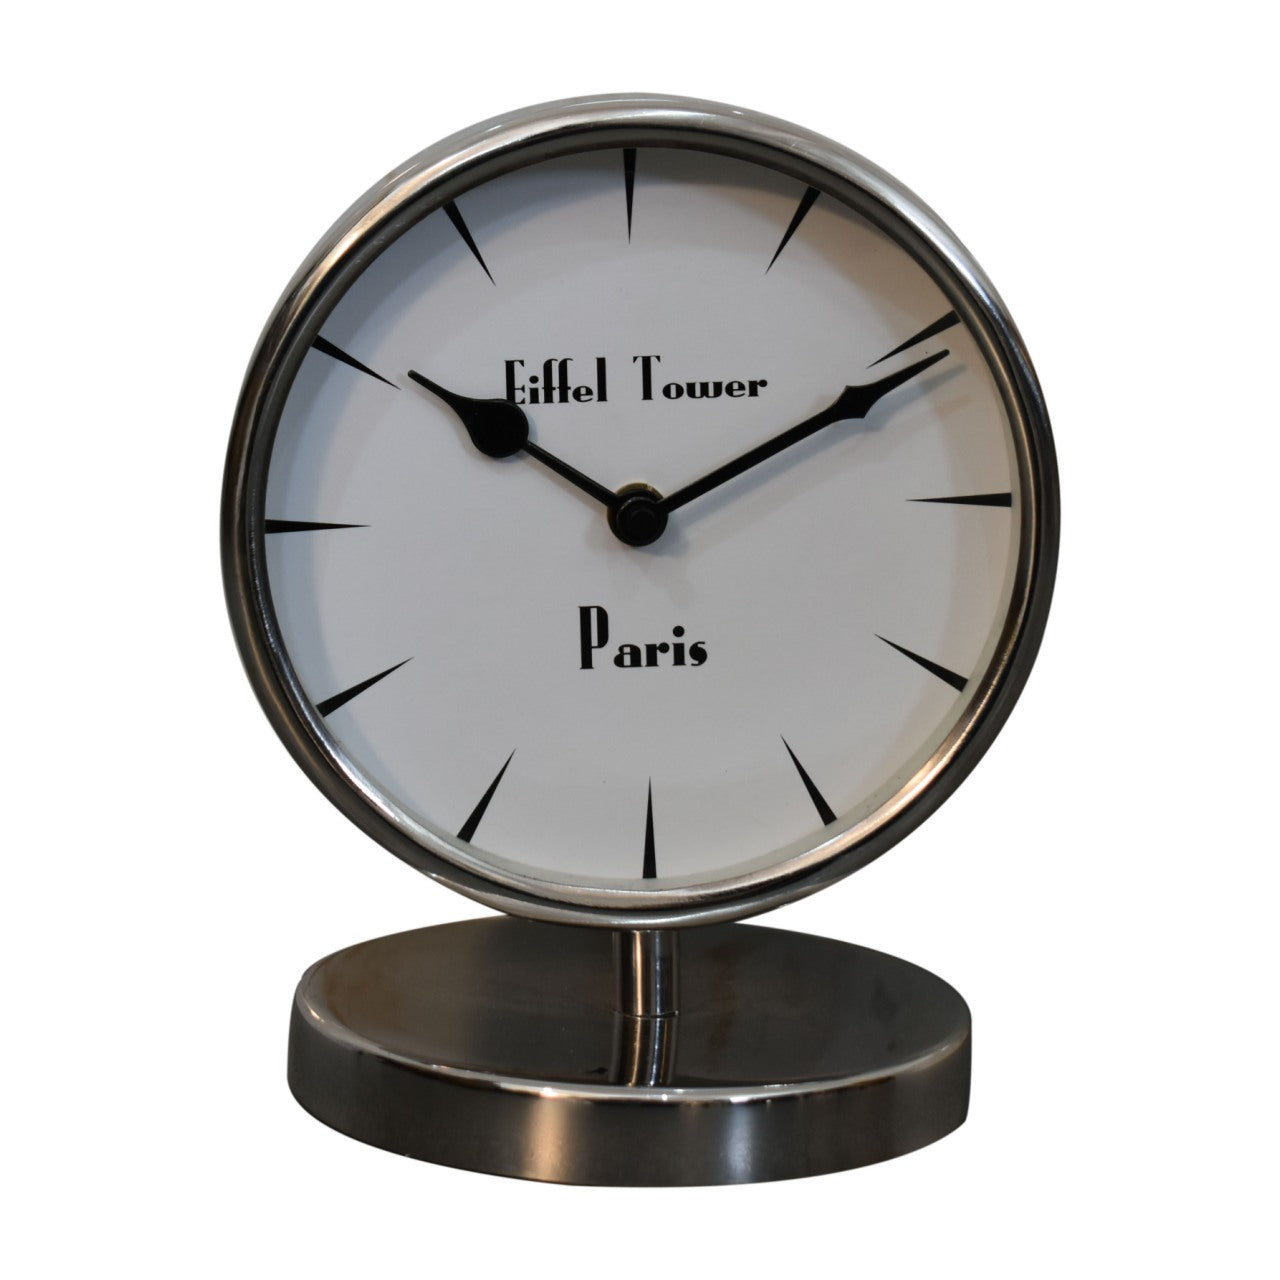 View Round Chrome Table Clock information